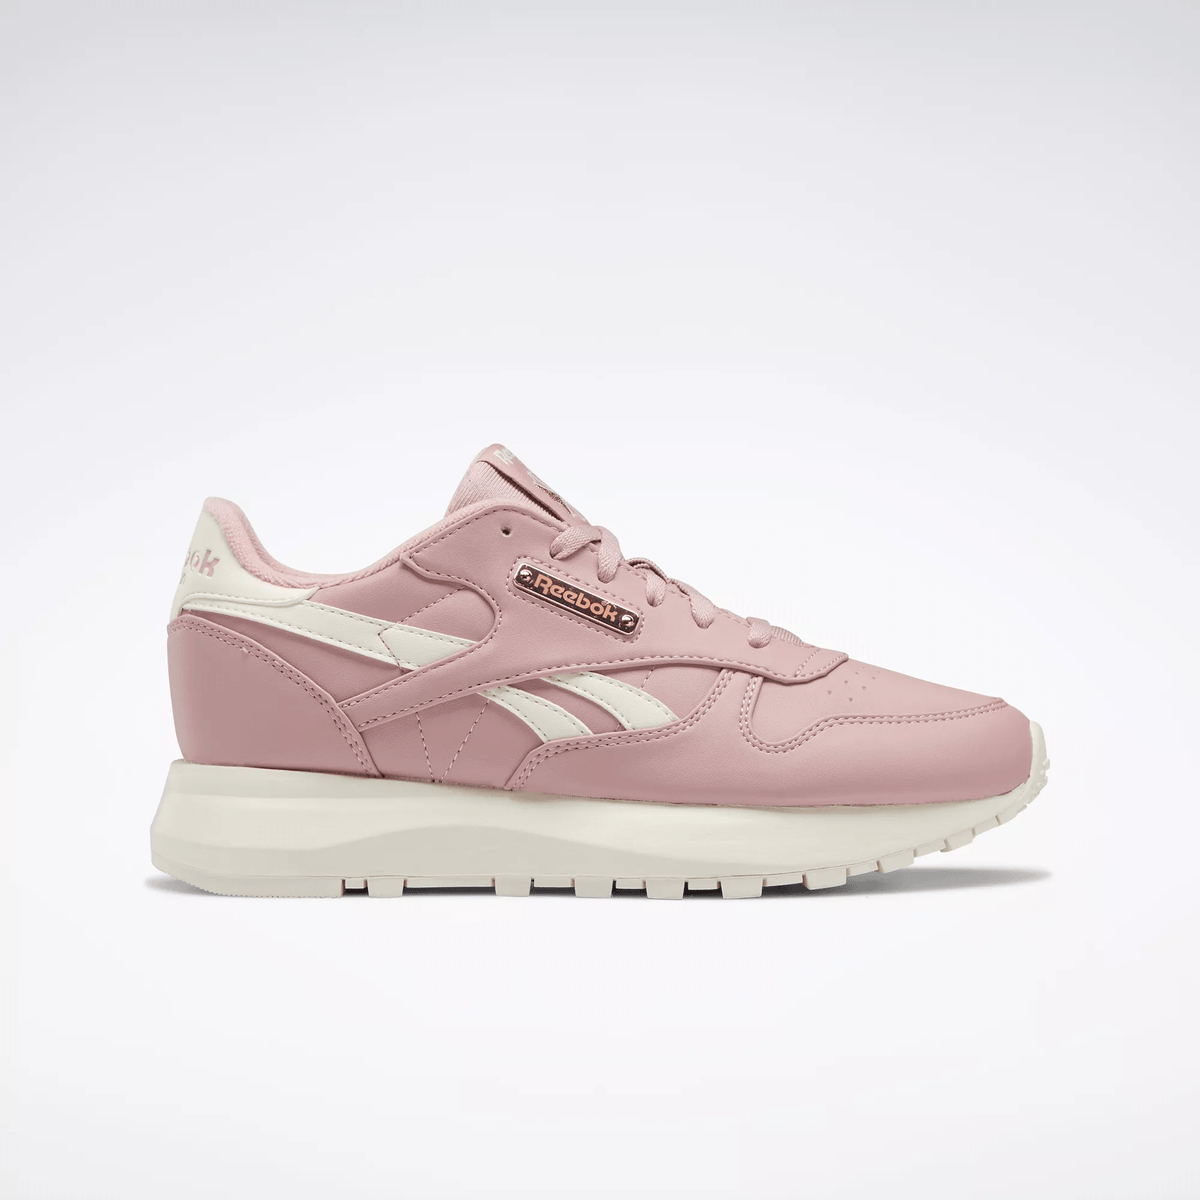 Reebok Women's Classic Leather SP Shoes Pink